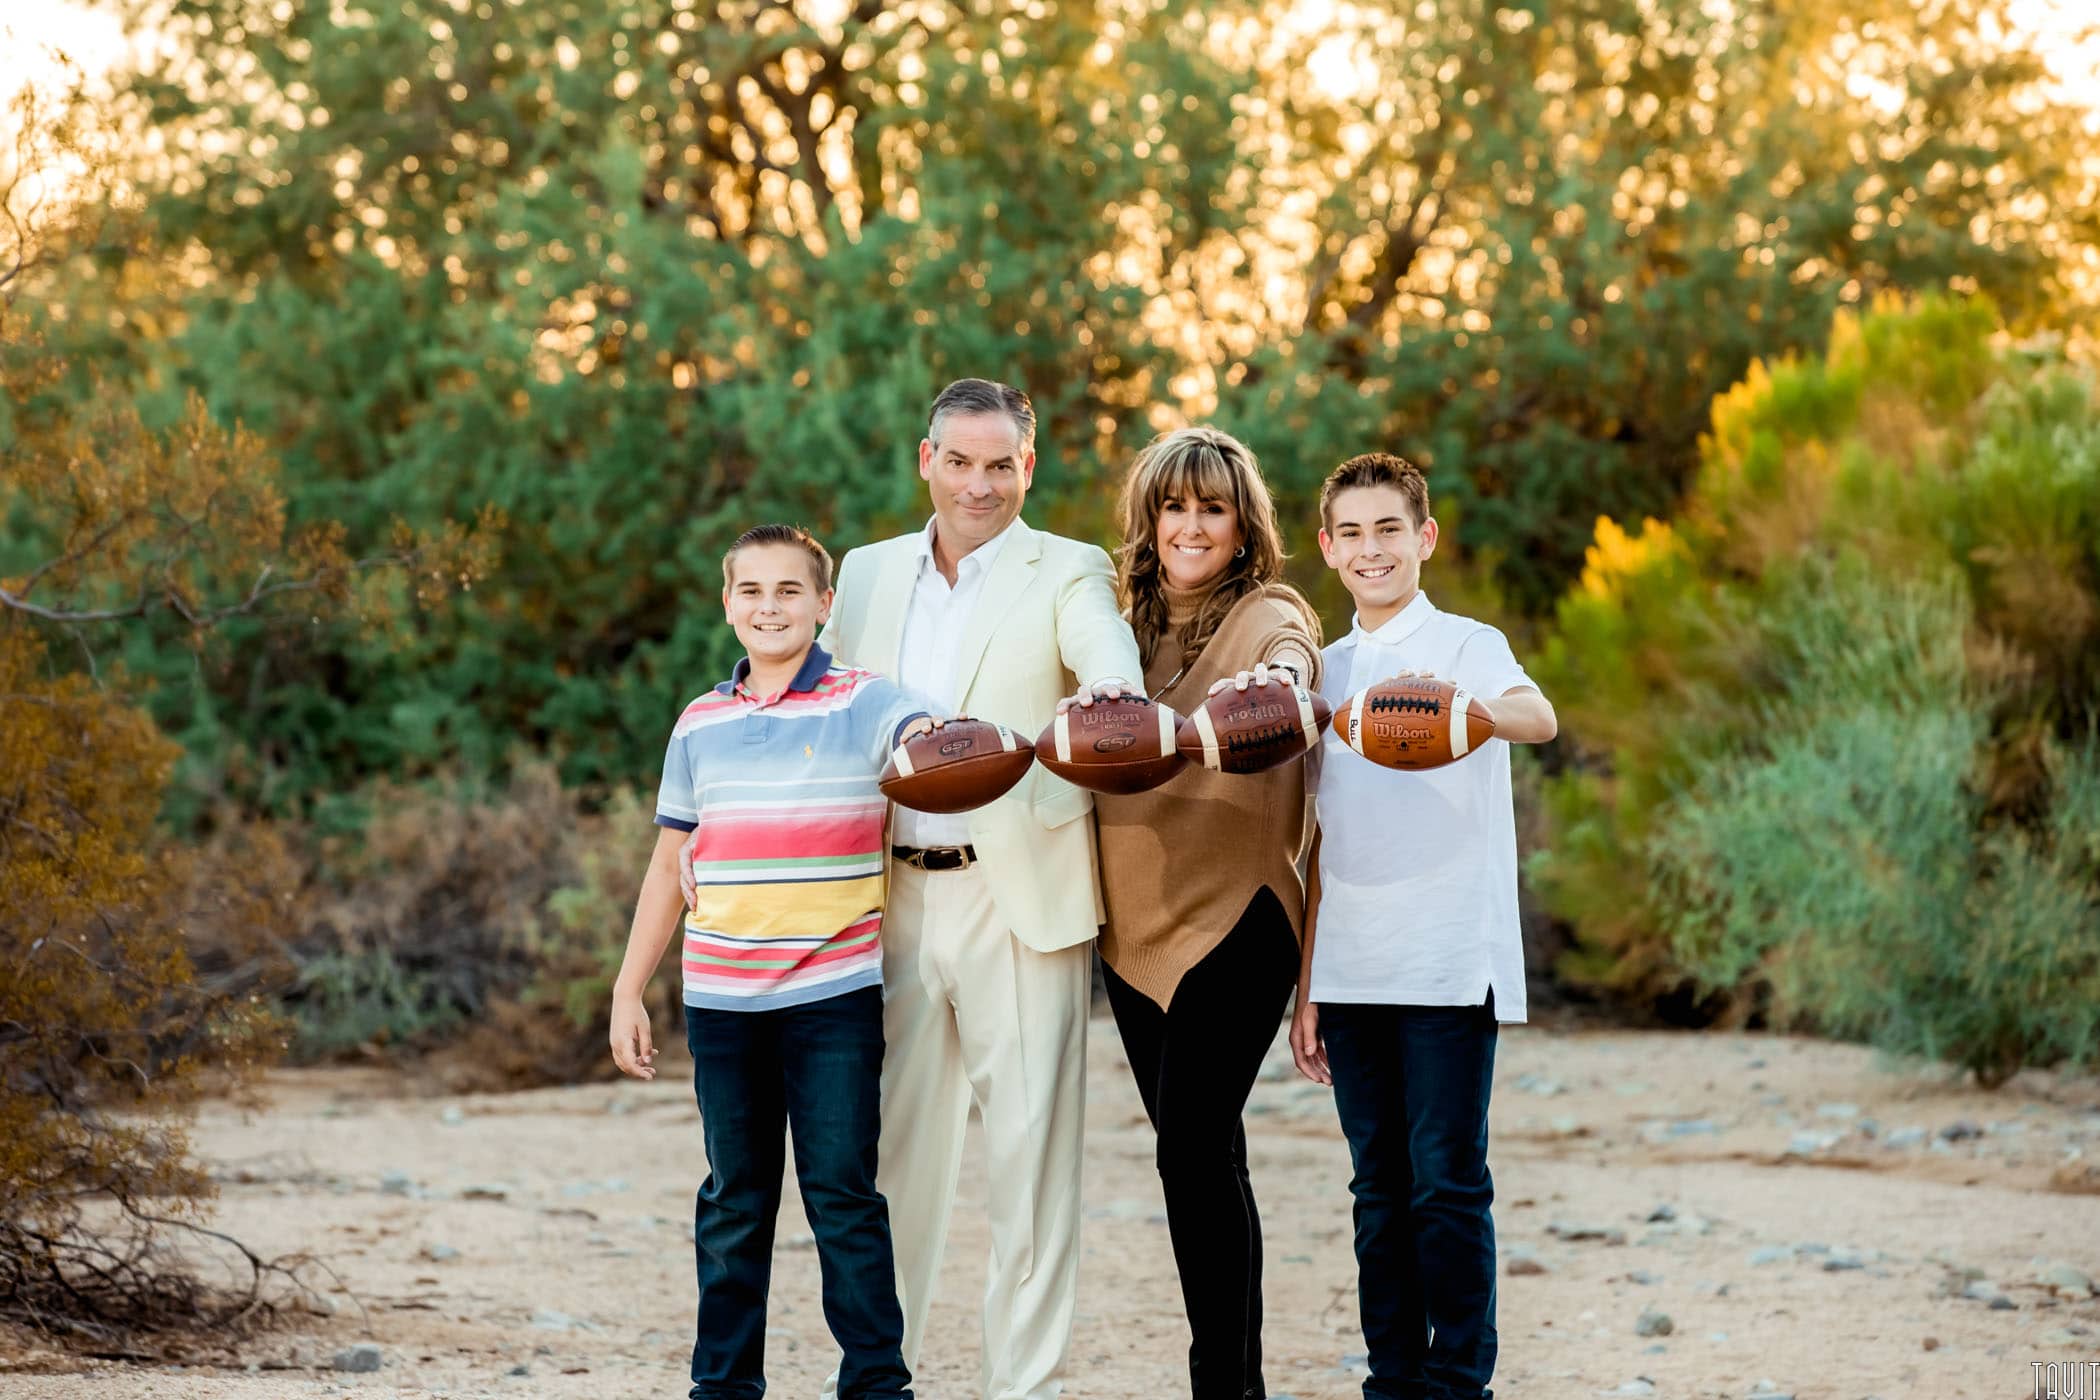 Dad and Mom with their two boys all holding footballs